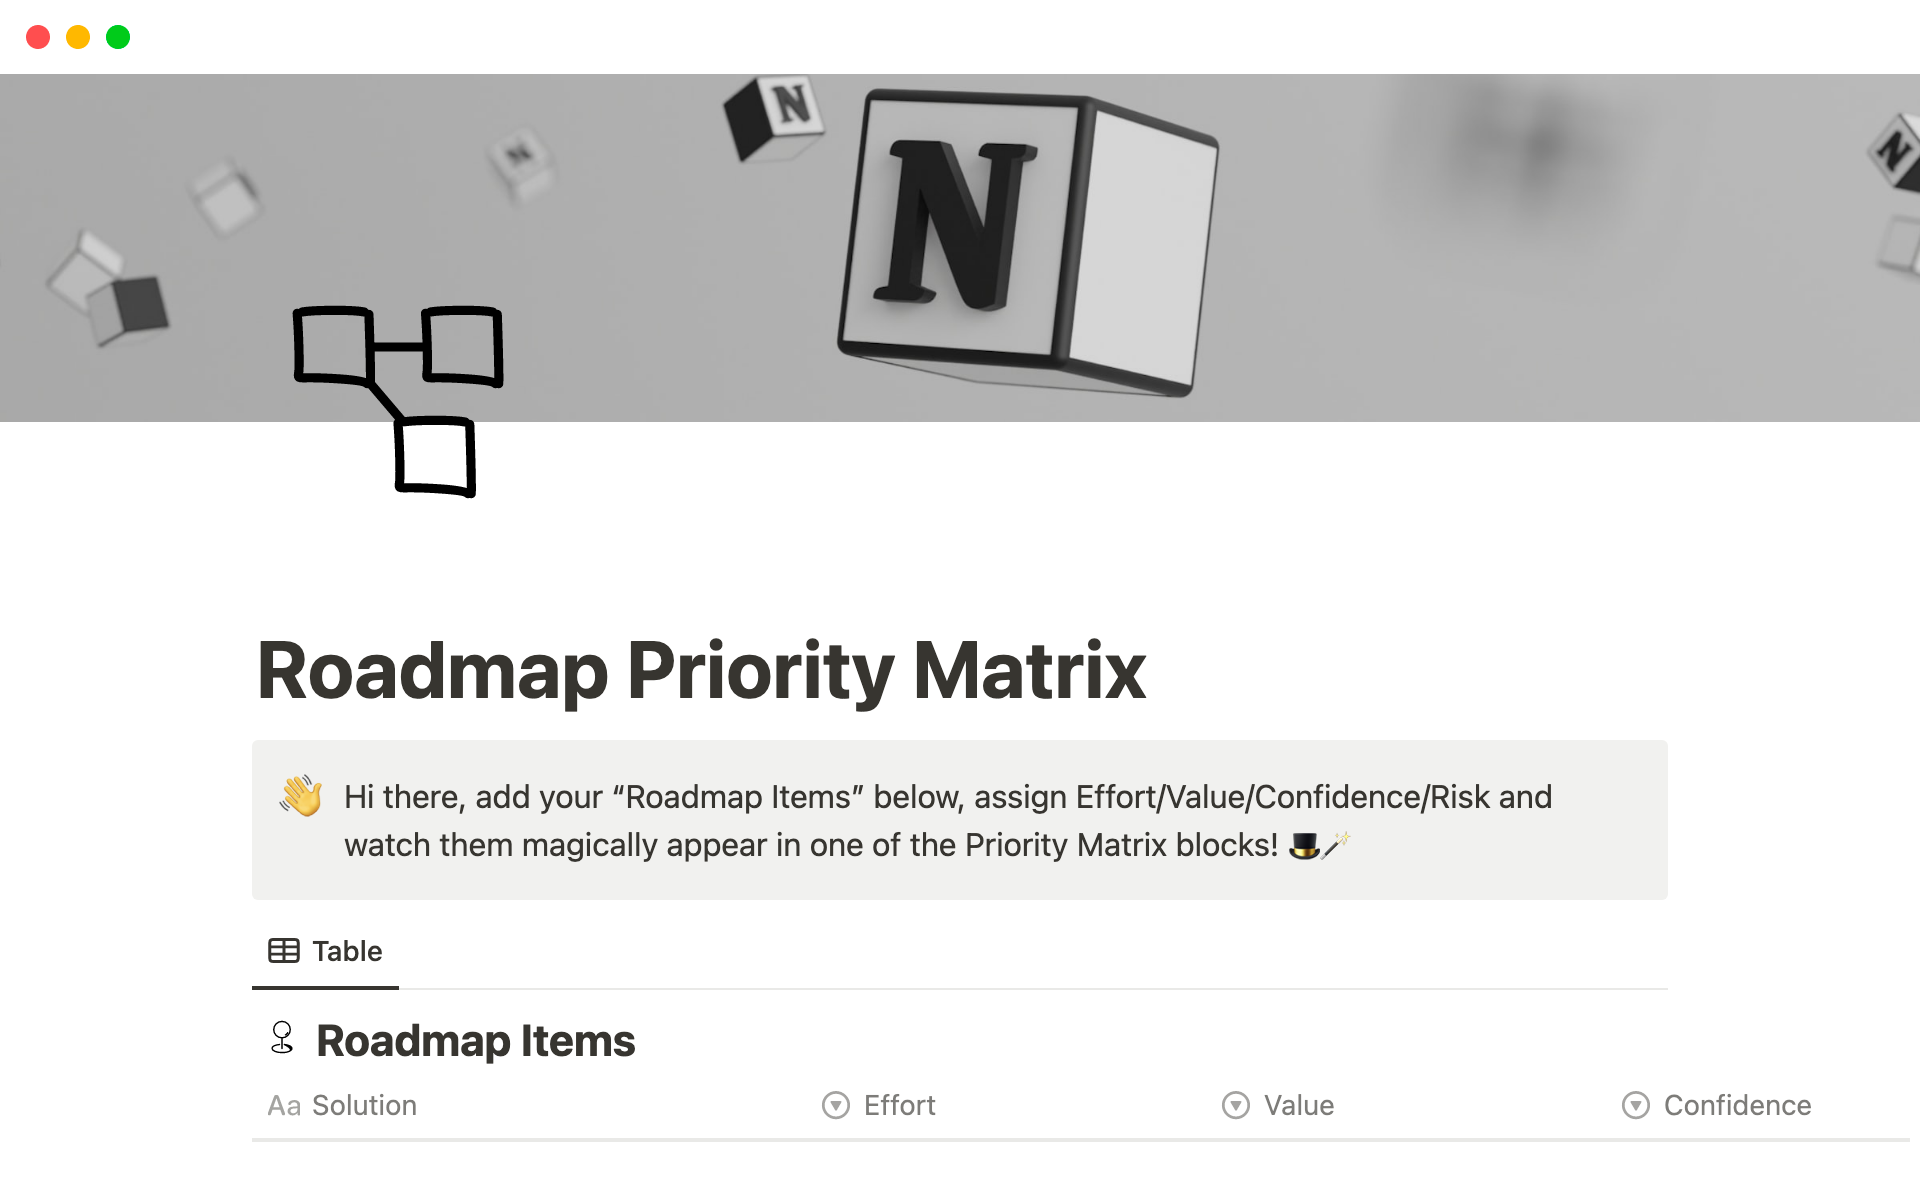 A Roadmap Priority Matrix is a productivity tool that helps you categorize your features and roadmap items based on their Value, Effort, Confidence level, and Risk Level.